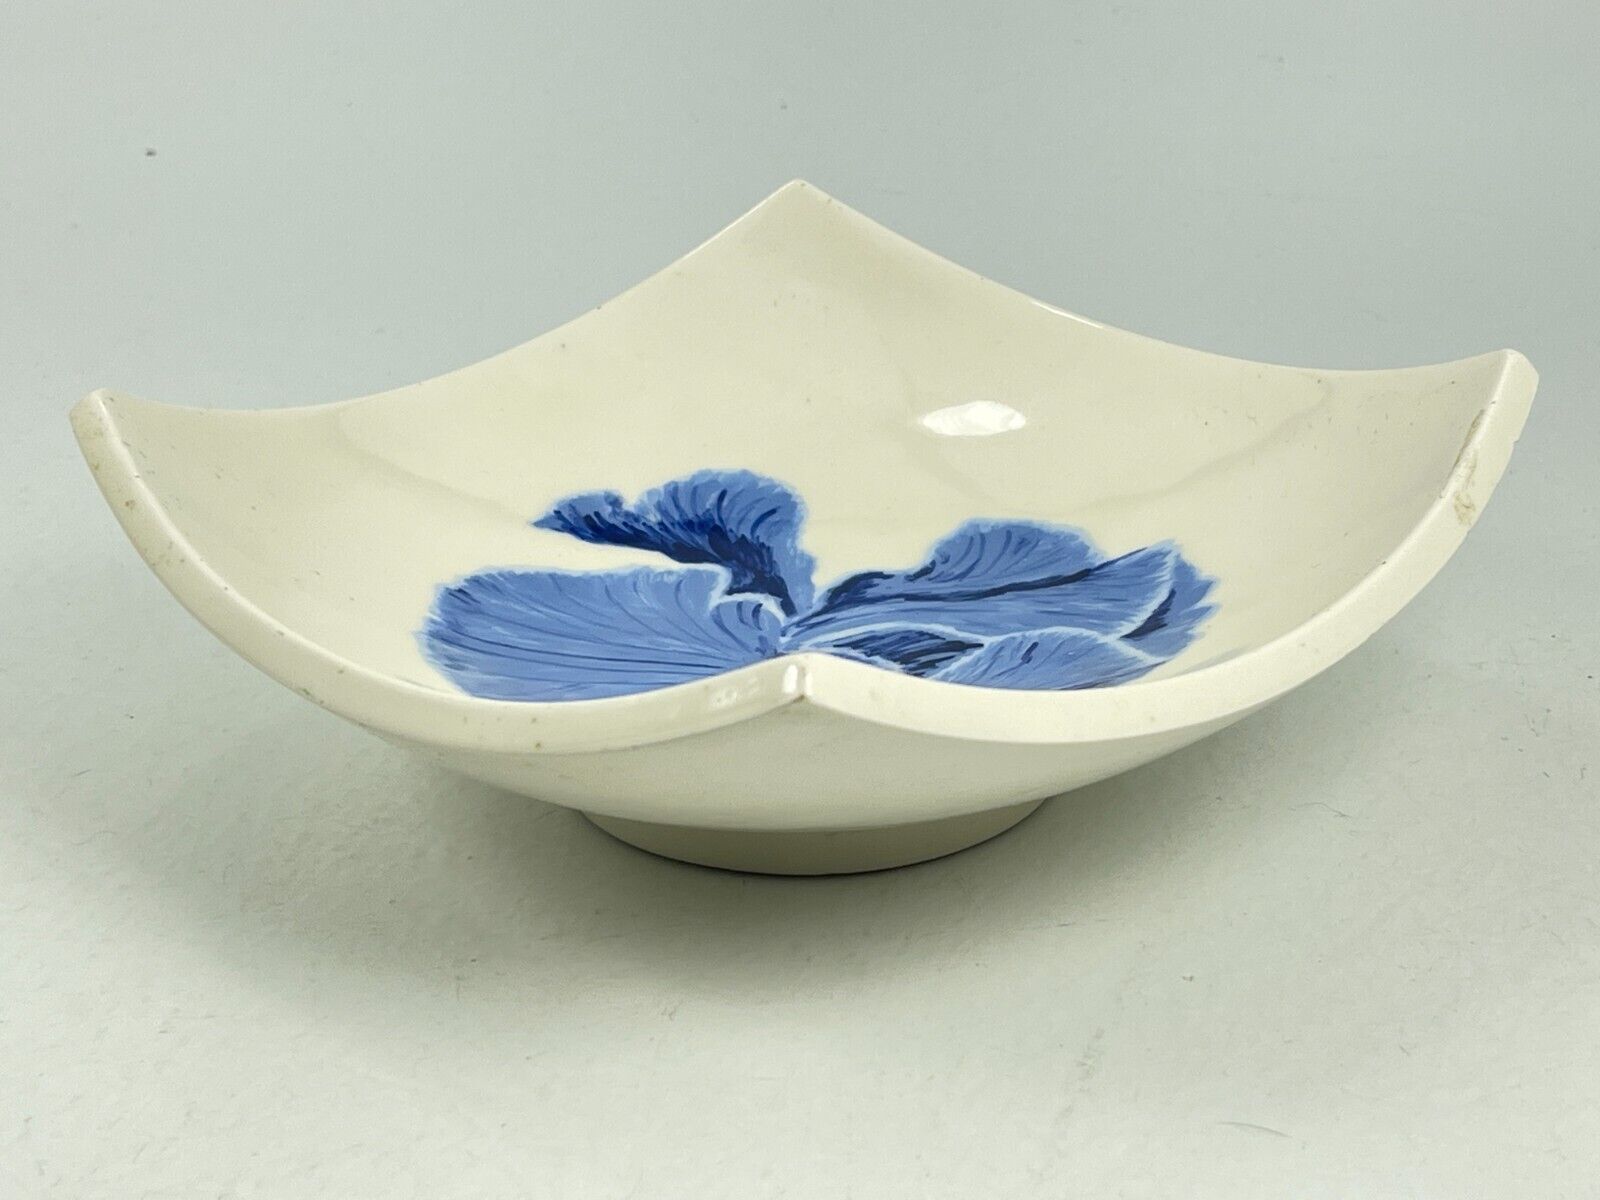 Vintage Square Blue Orchid Flower Ashtray Ash Tray Trinket Coin Jewelry Dish